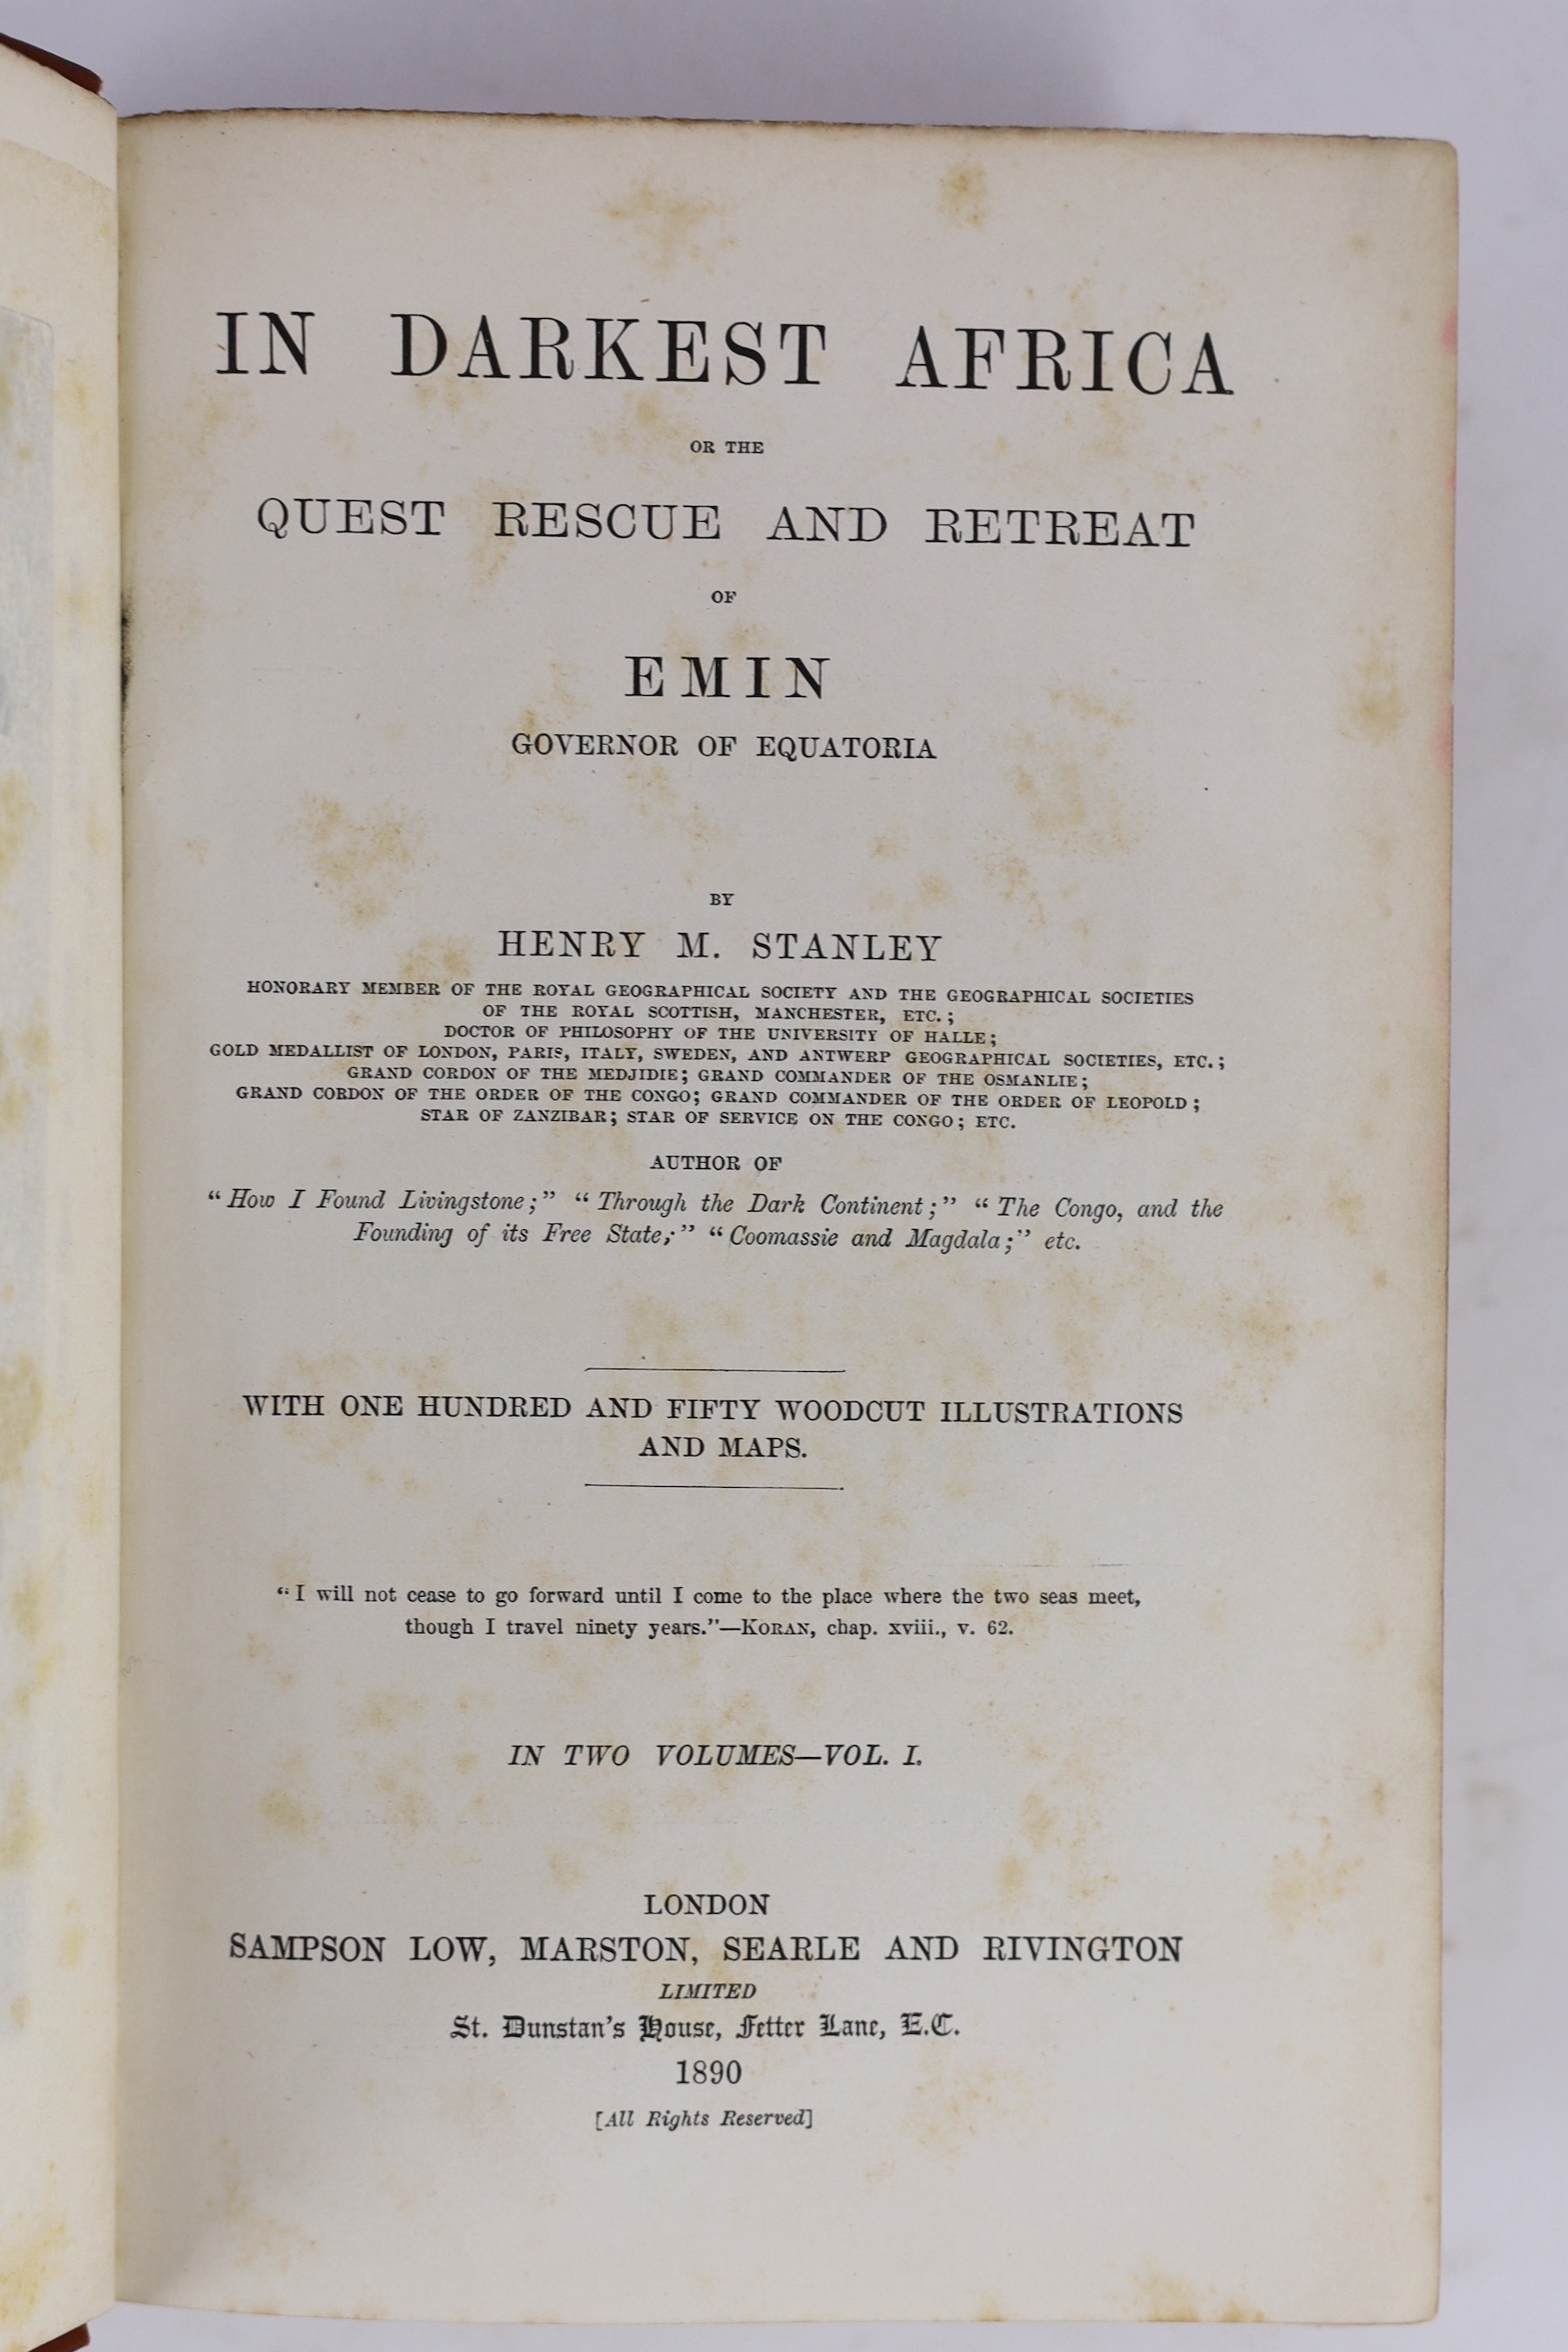 Stanley, Henry Morton, Sir - In Darkest Africa, or the Quest Rescue , and Retreat of Emin, Governor of Equatorial, 1st edition, 2 vols, 8vo, original pictorial cloth gilt, with 4 maps (1st map in vol 1 torn and with loss